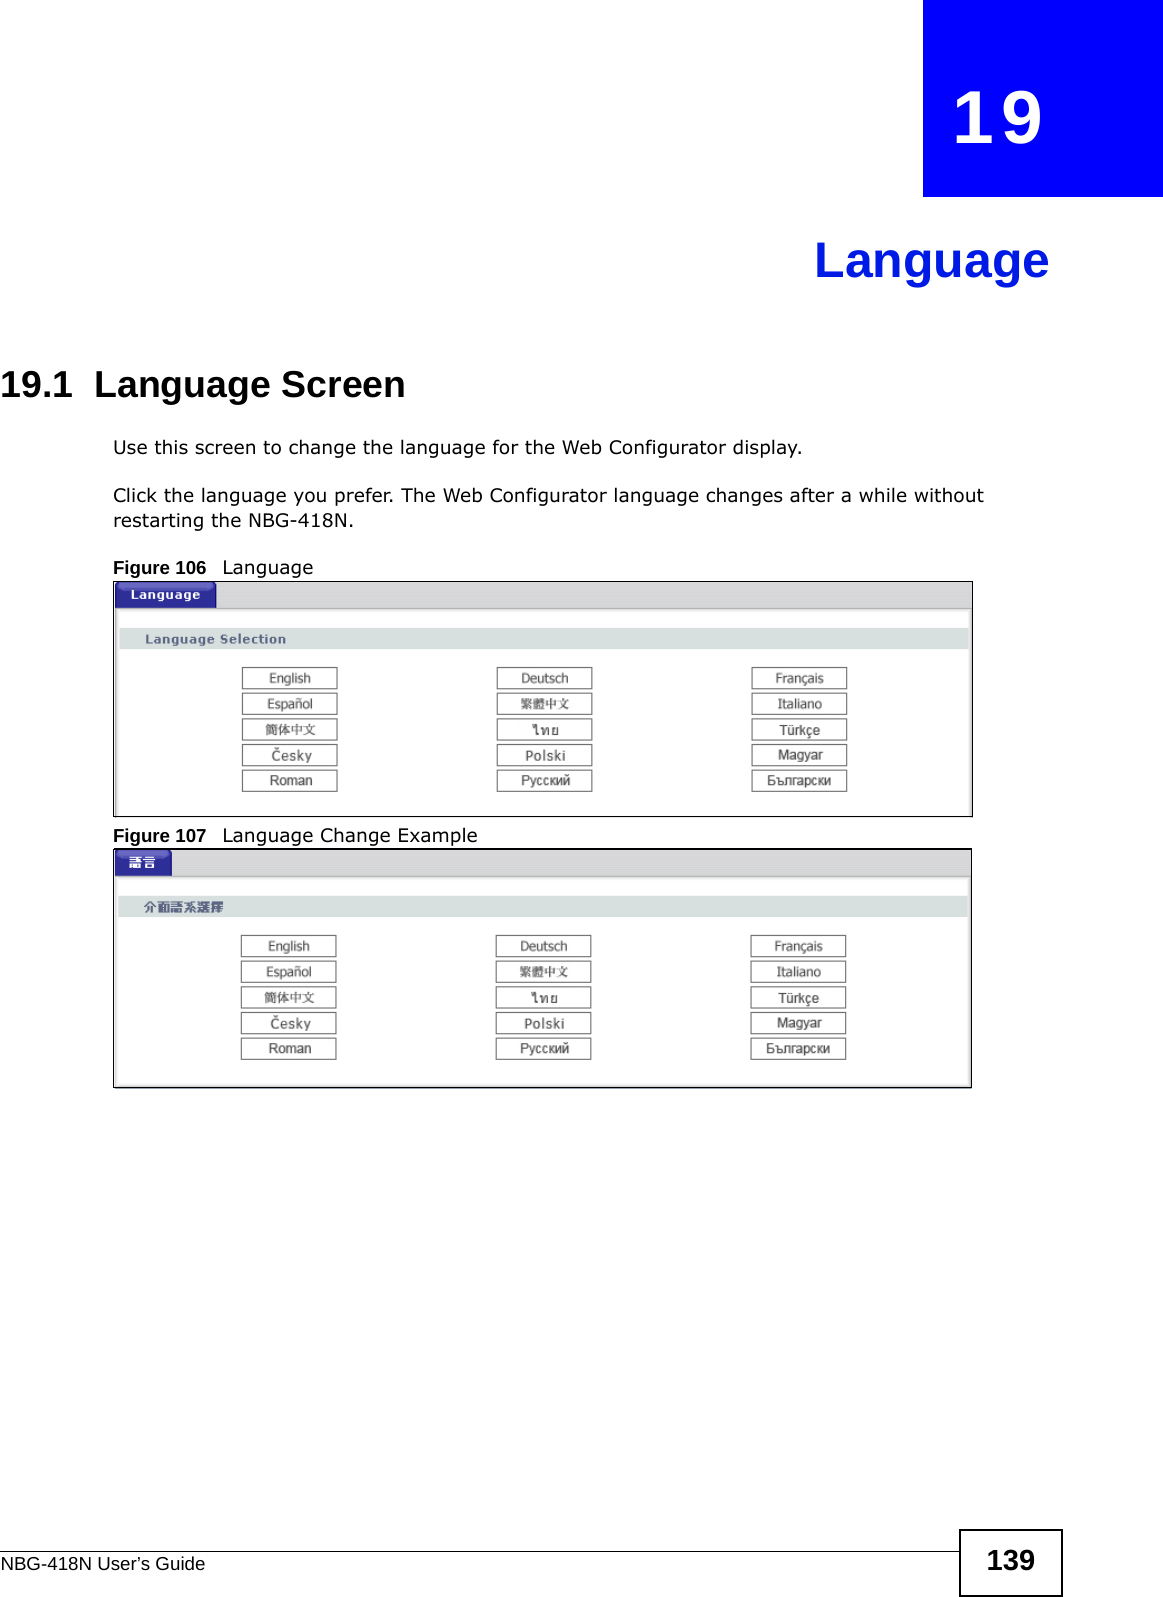 NBG-418N User’s Guide 139CHAPTER   19Language19.1  Language ScreenUse this screen to change the language for the Web Configurator display.Click the language you prefer. The Web Configurator language changes after a while without restarting the NBG-418N.Figure 106   LanguageFigure 107   Language Change Example